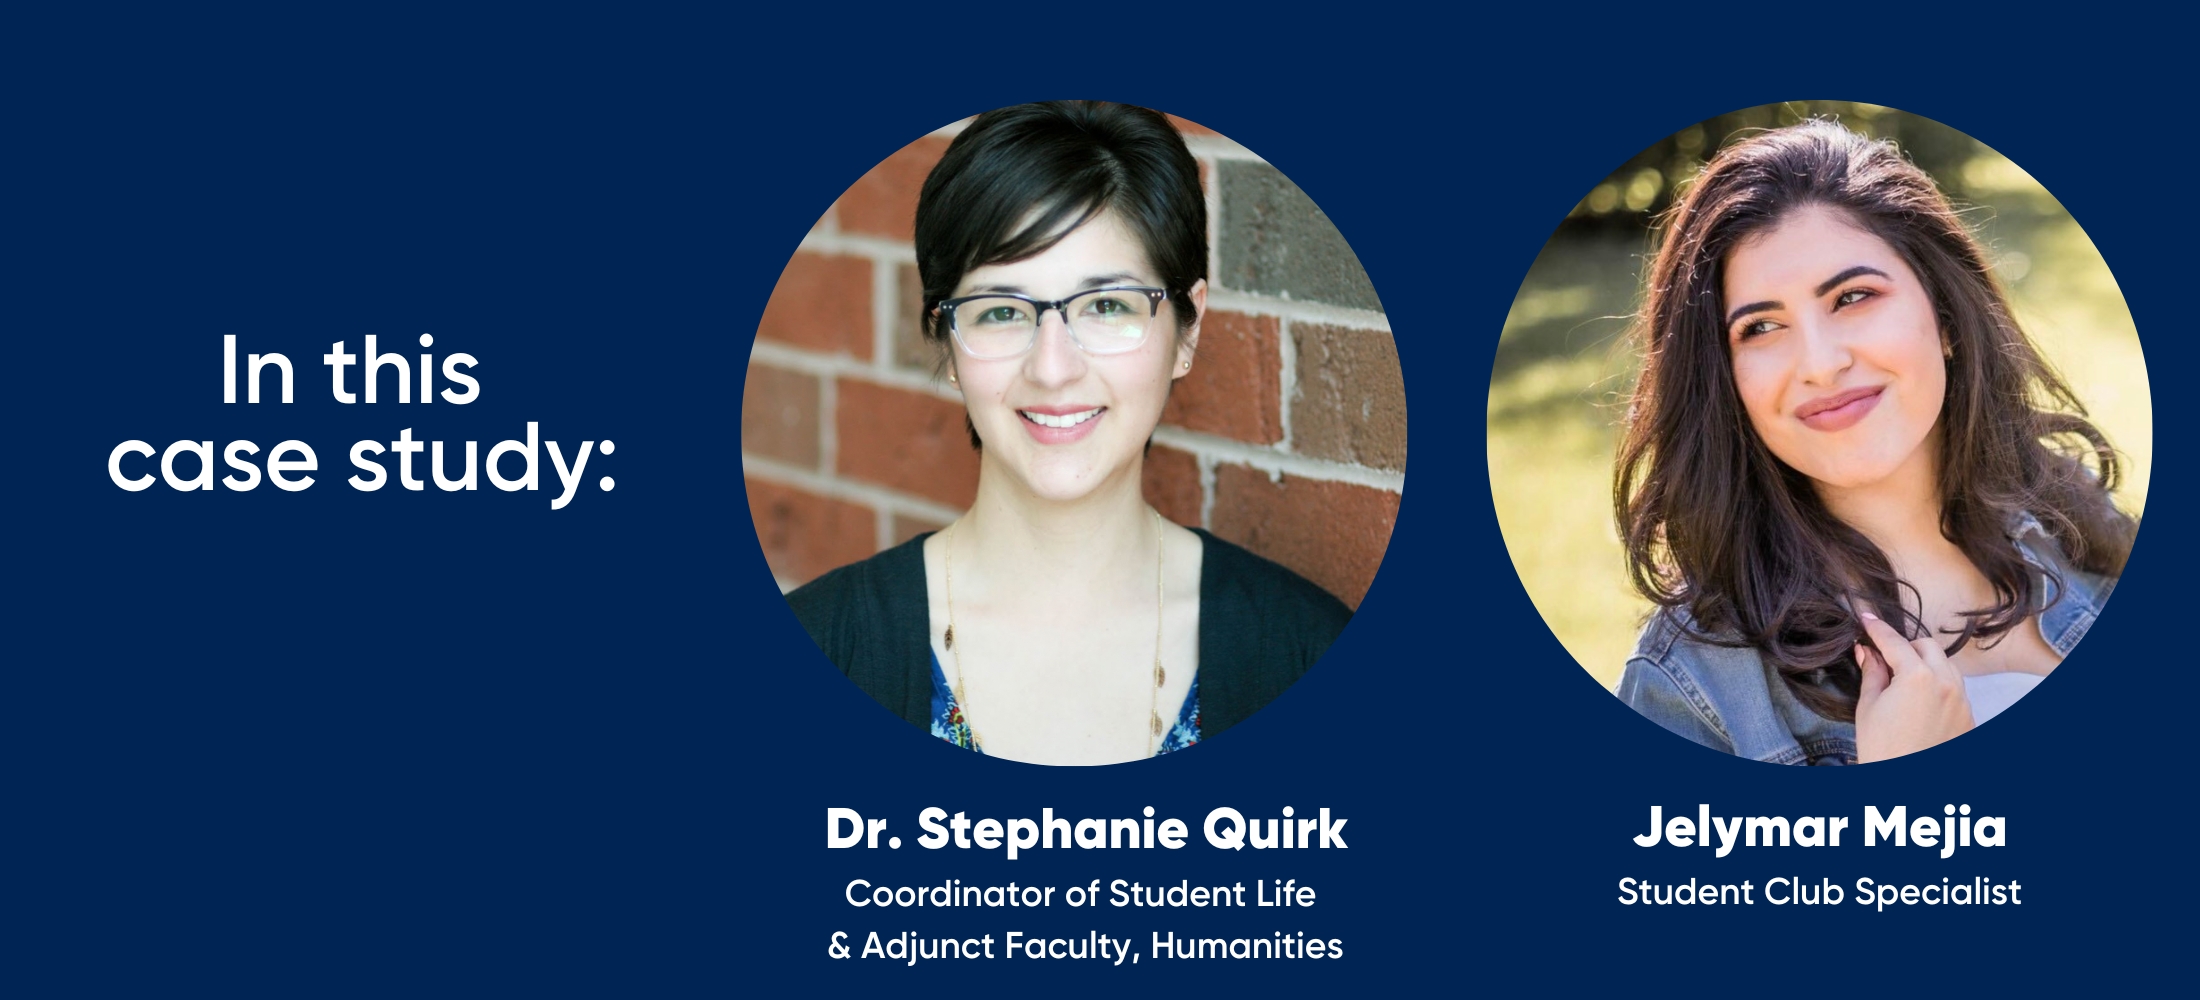 in this case study: Dr. Stephanie Quirk, Coordinator of Student Life  & Adjunct Faculty, Humanities and Jelymar Mejia, Student Life Specialist 